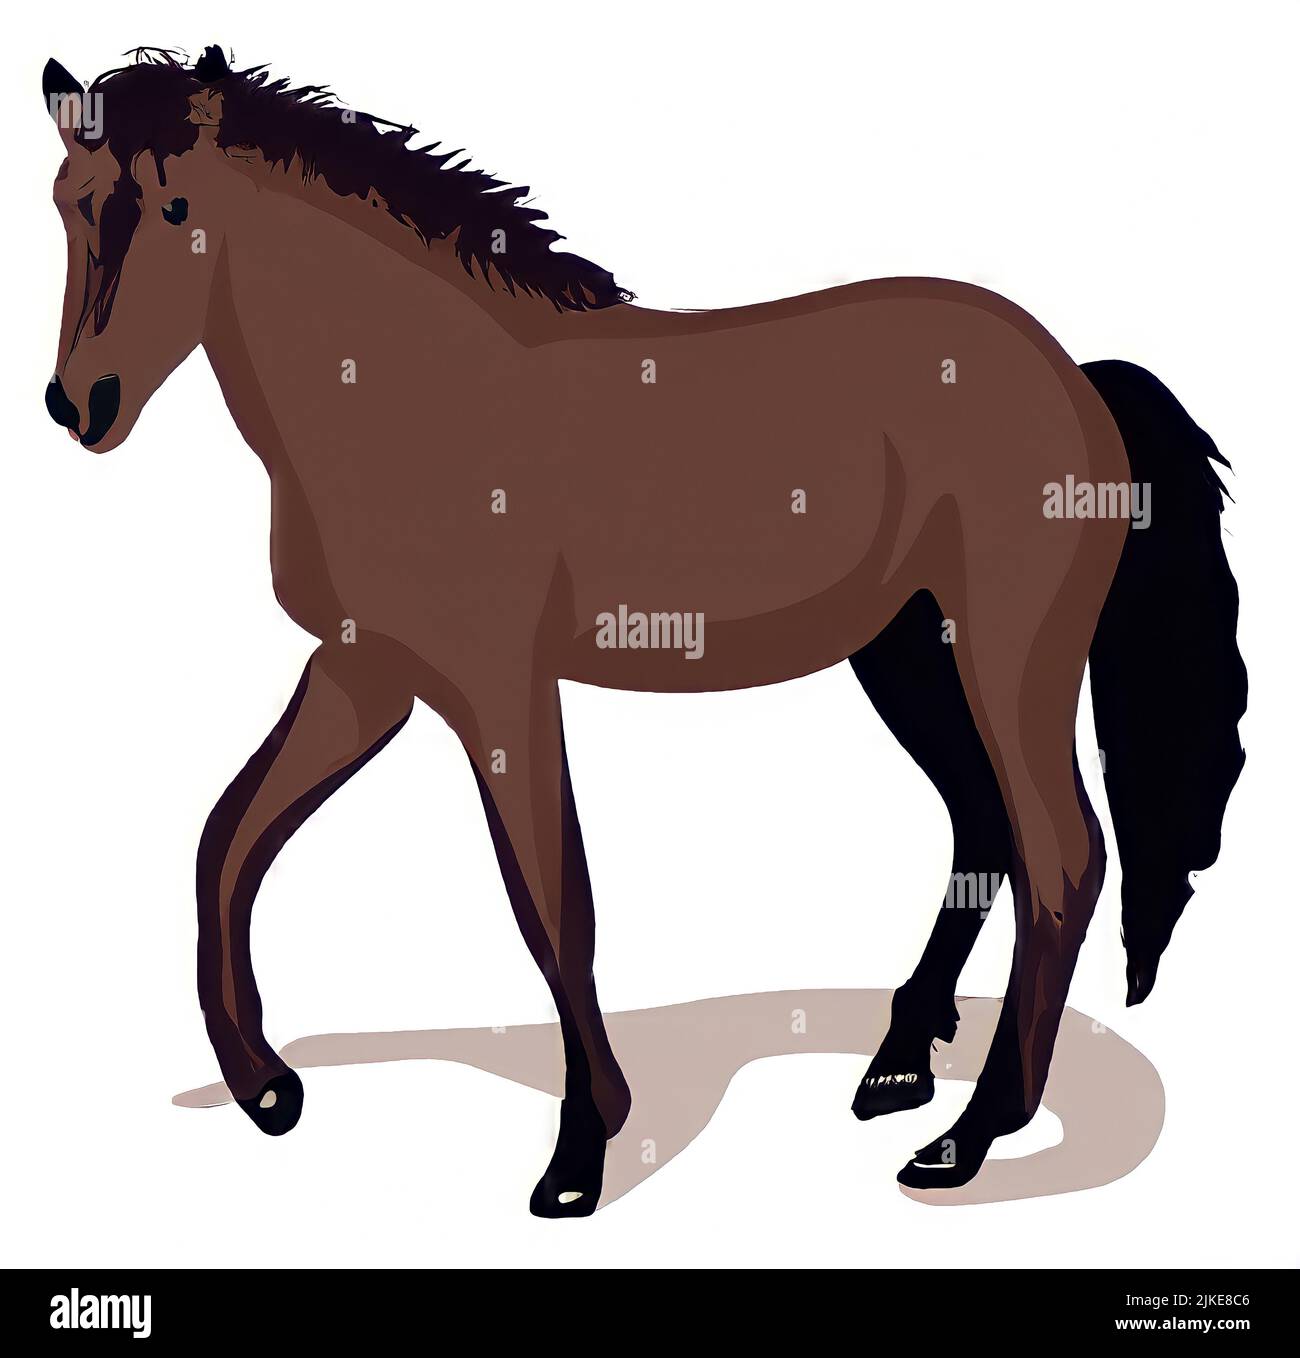 Looking for a stylish 3D illustration of a horse? This beautiful animal is perfect for any project! Stock Photo